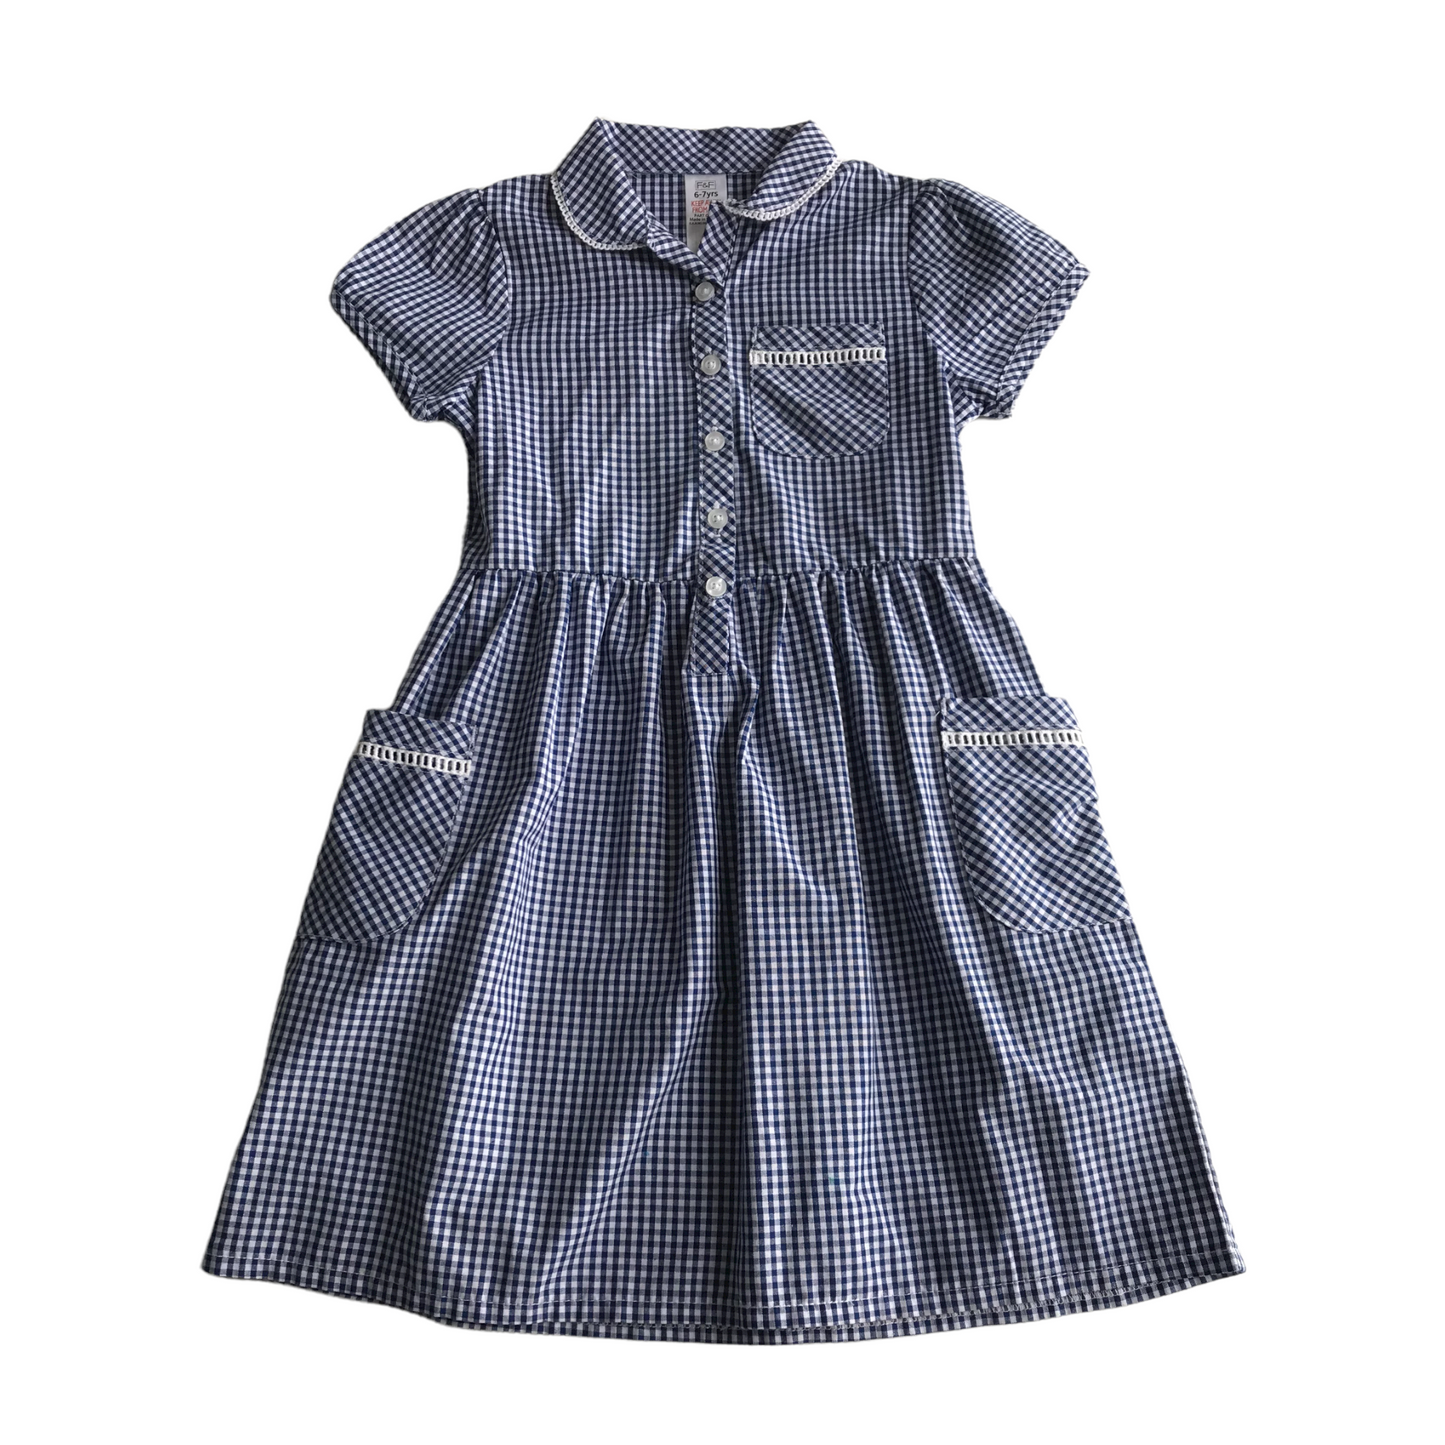 School Summer Gingham Dress with Buttons